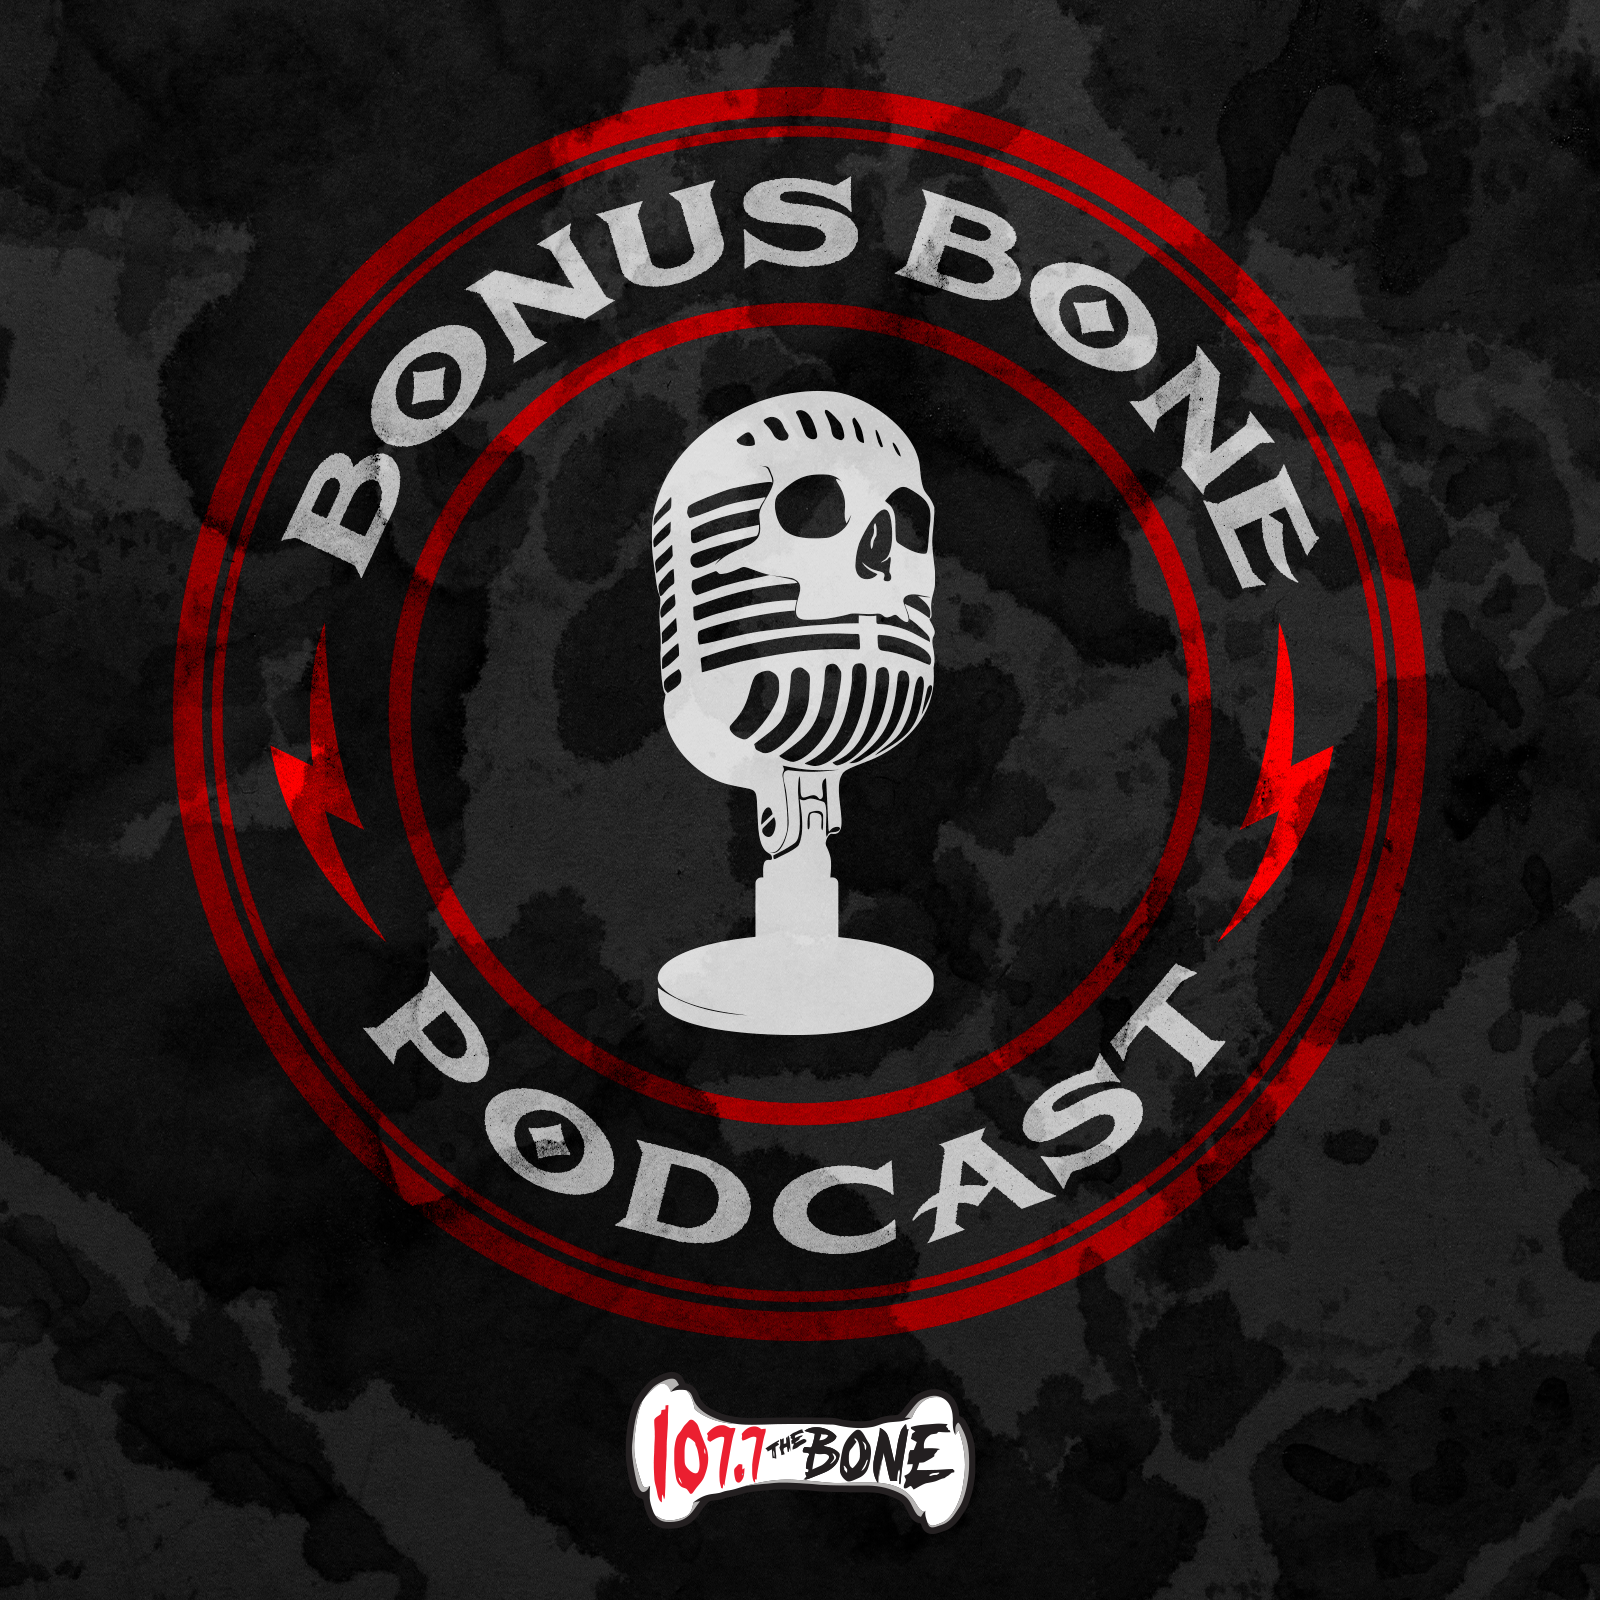 The Bonus Bone: Who Should Be On The Mount Rushmore Of Rock?